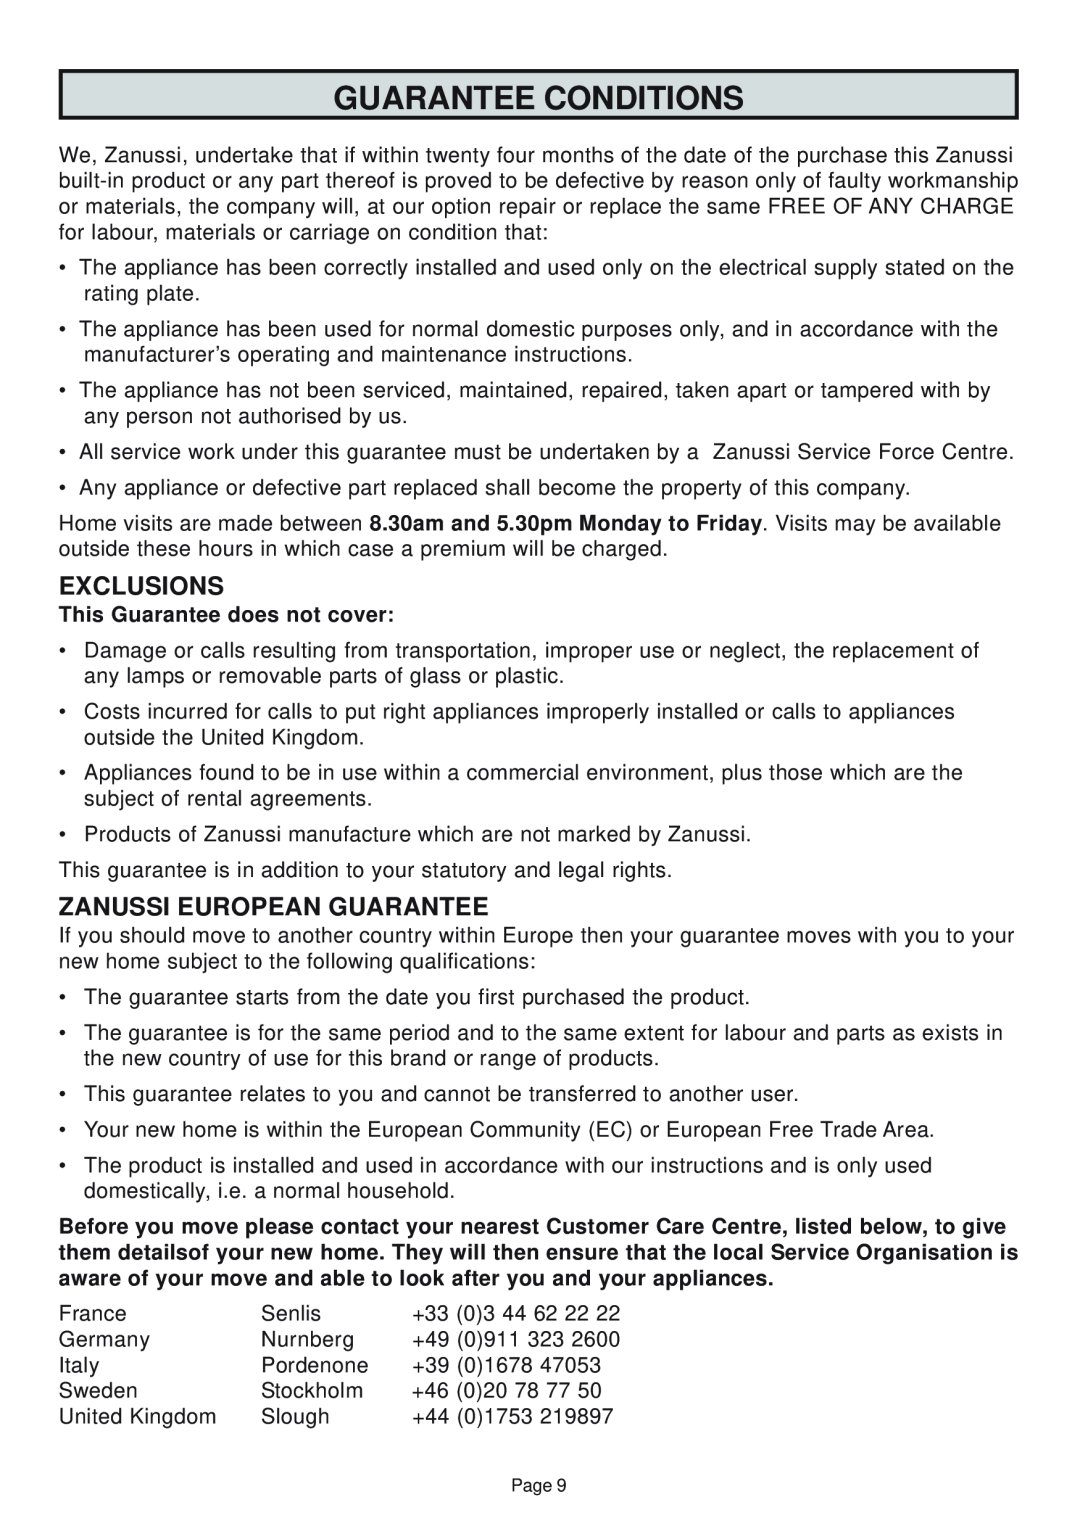 Zanussi ZHC960 manual Guarantee Conditions, Exclusions, Zanussi European Guarantee, This Guarantee does not cover 